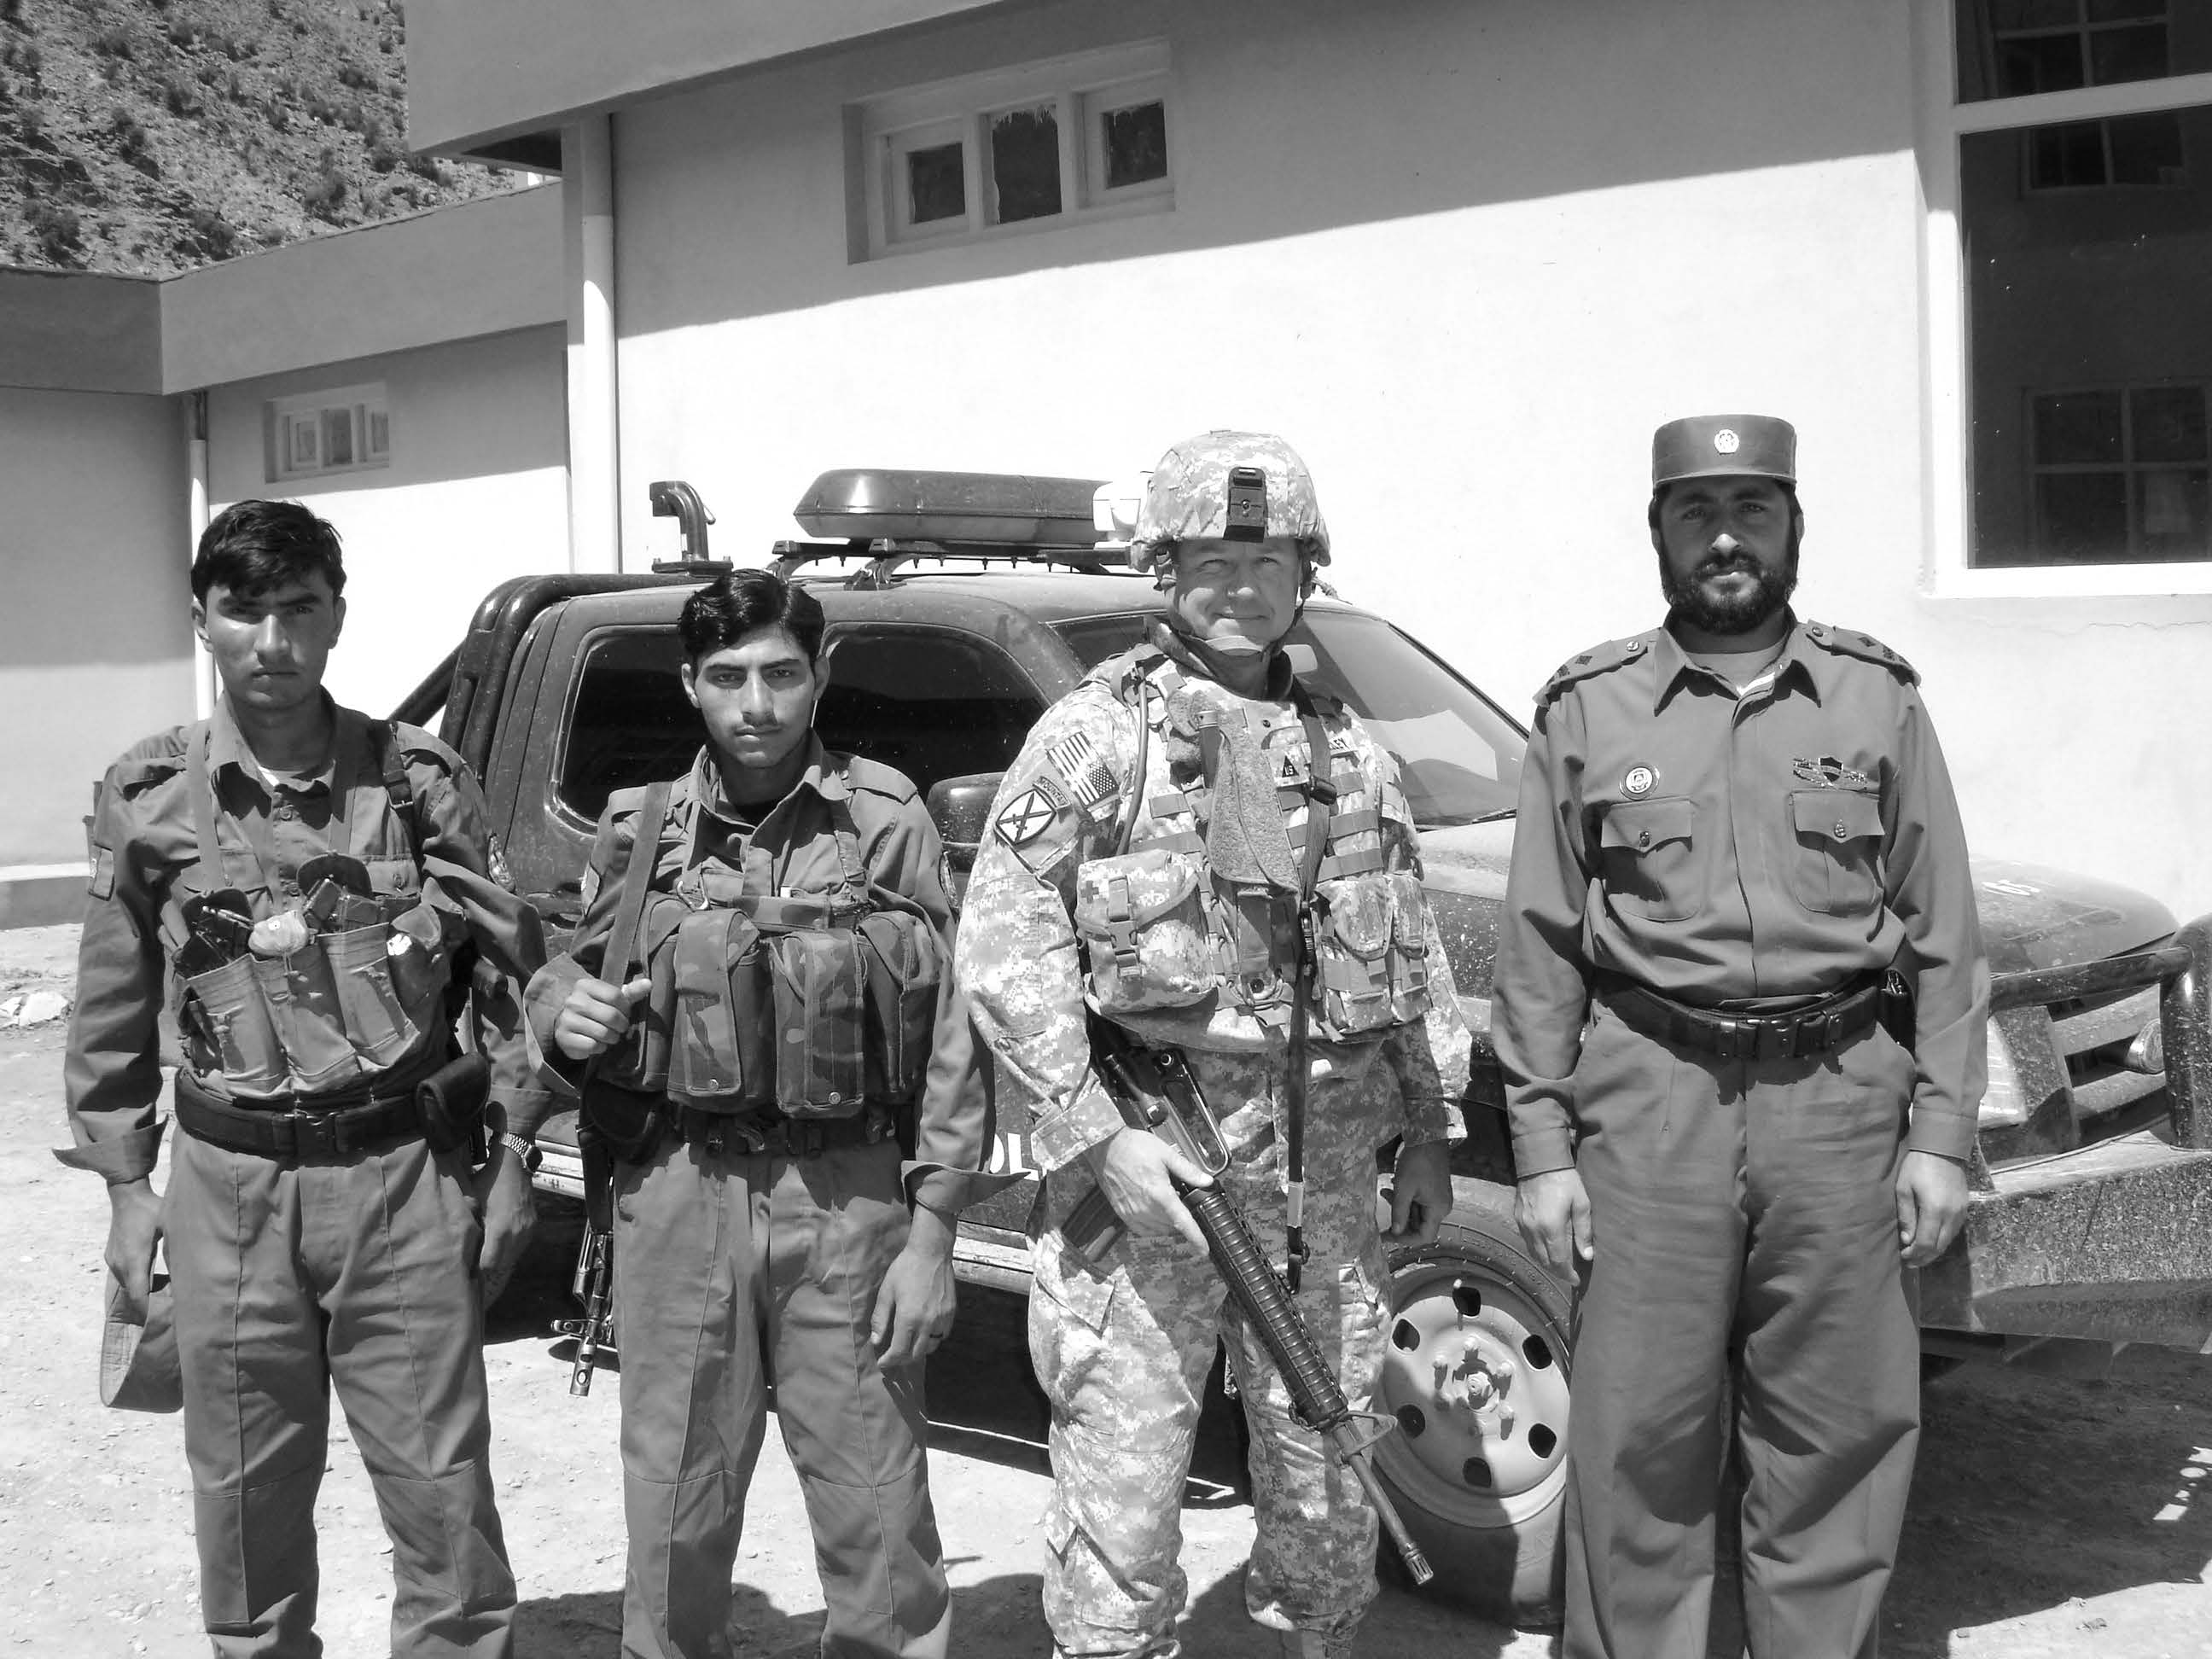 Michael Beesley (second from right) is shown with three Afghan soldiers. Courtesy of Michael Beesley.